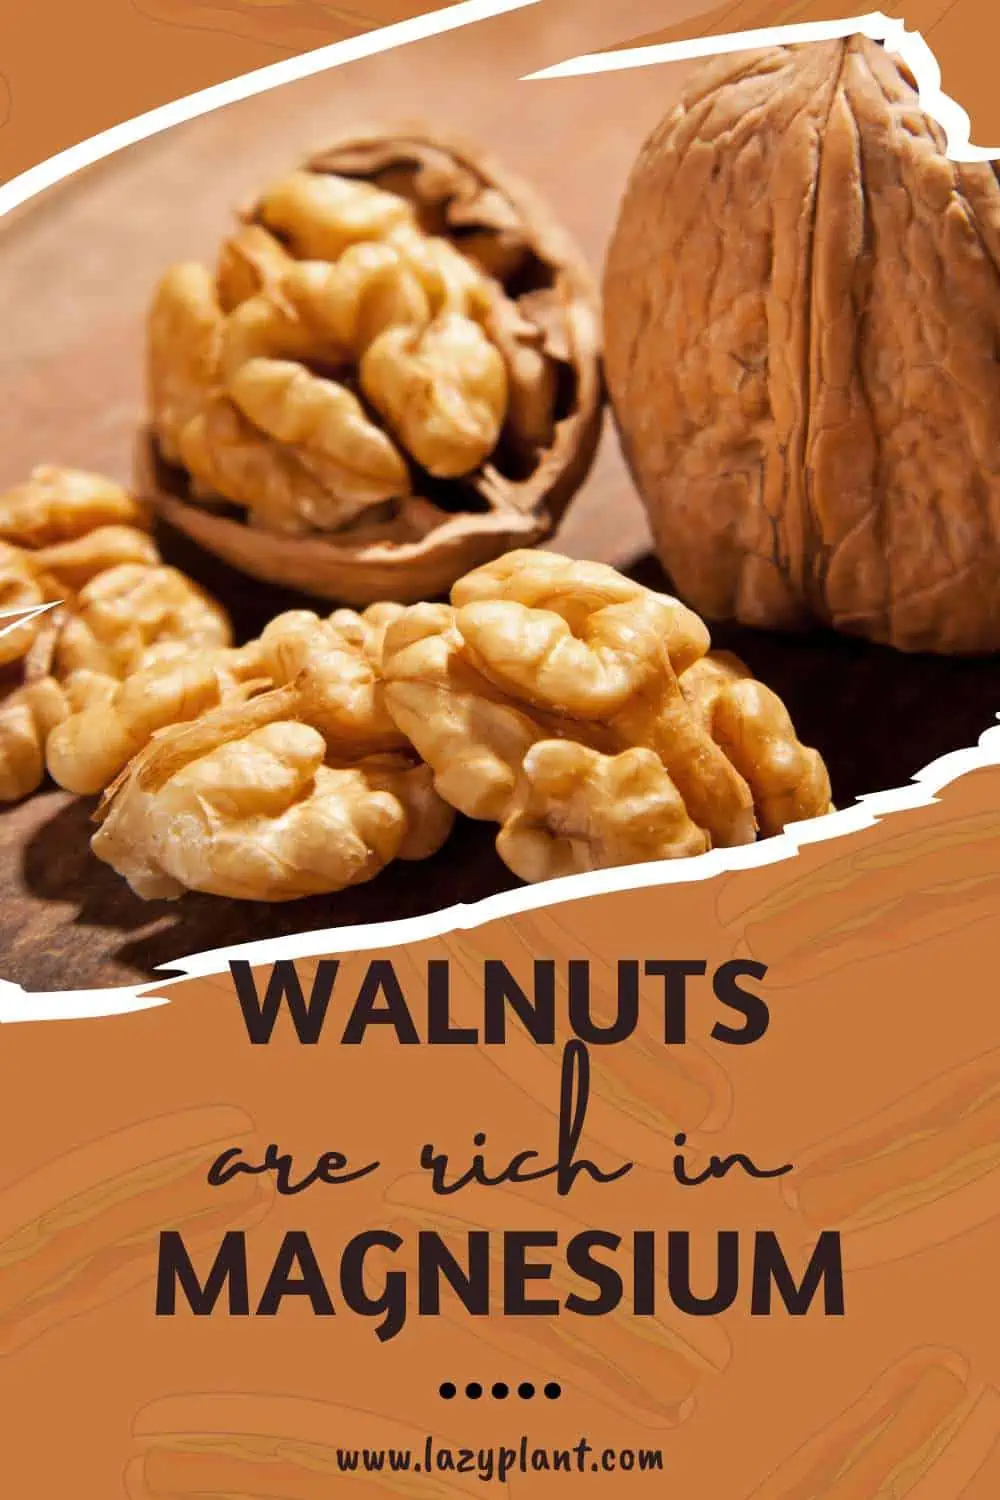 How much magnesium is in walnuts?